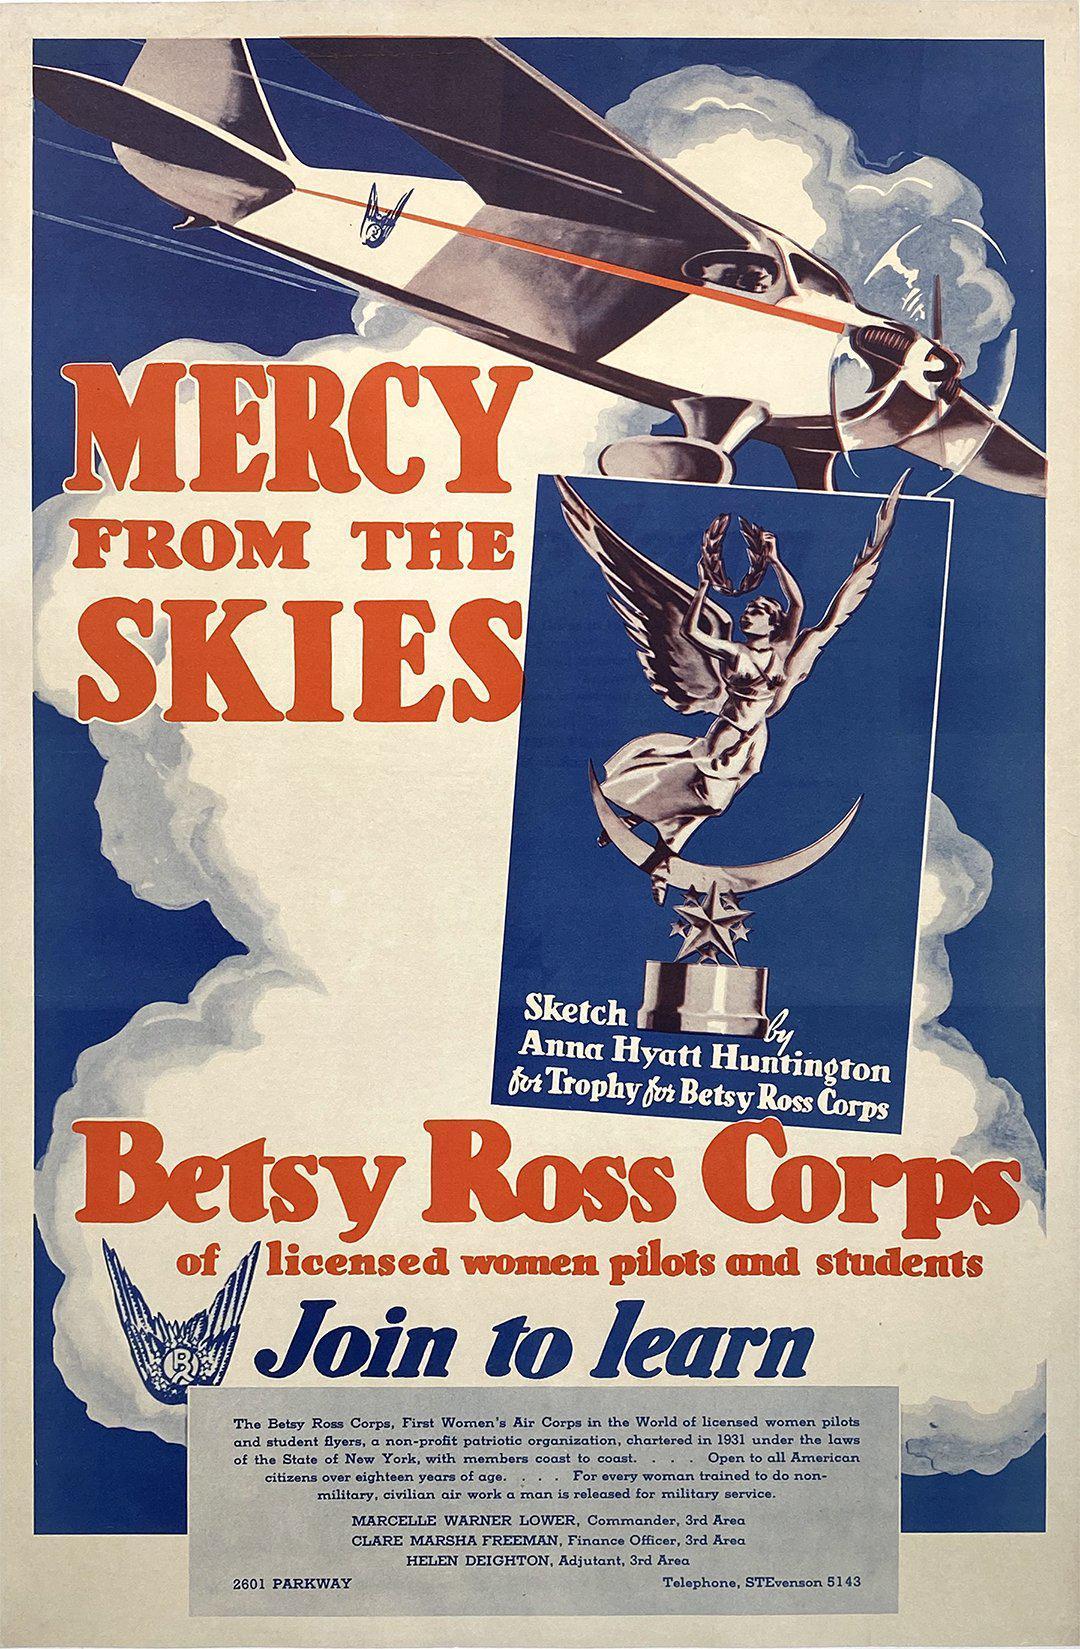 Original Vintage Female Aviation Poster Betsy Ross Corps Mercy from the Skies c1931